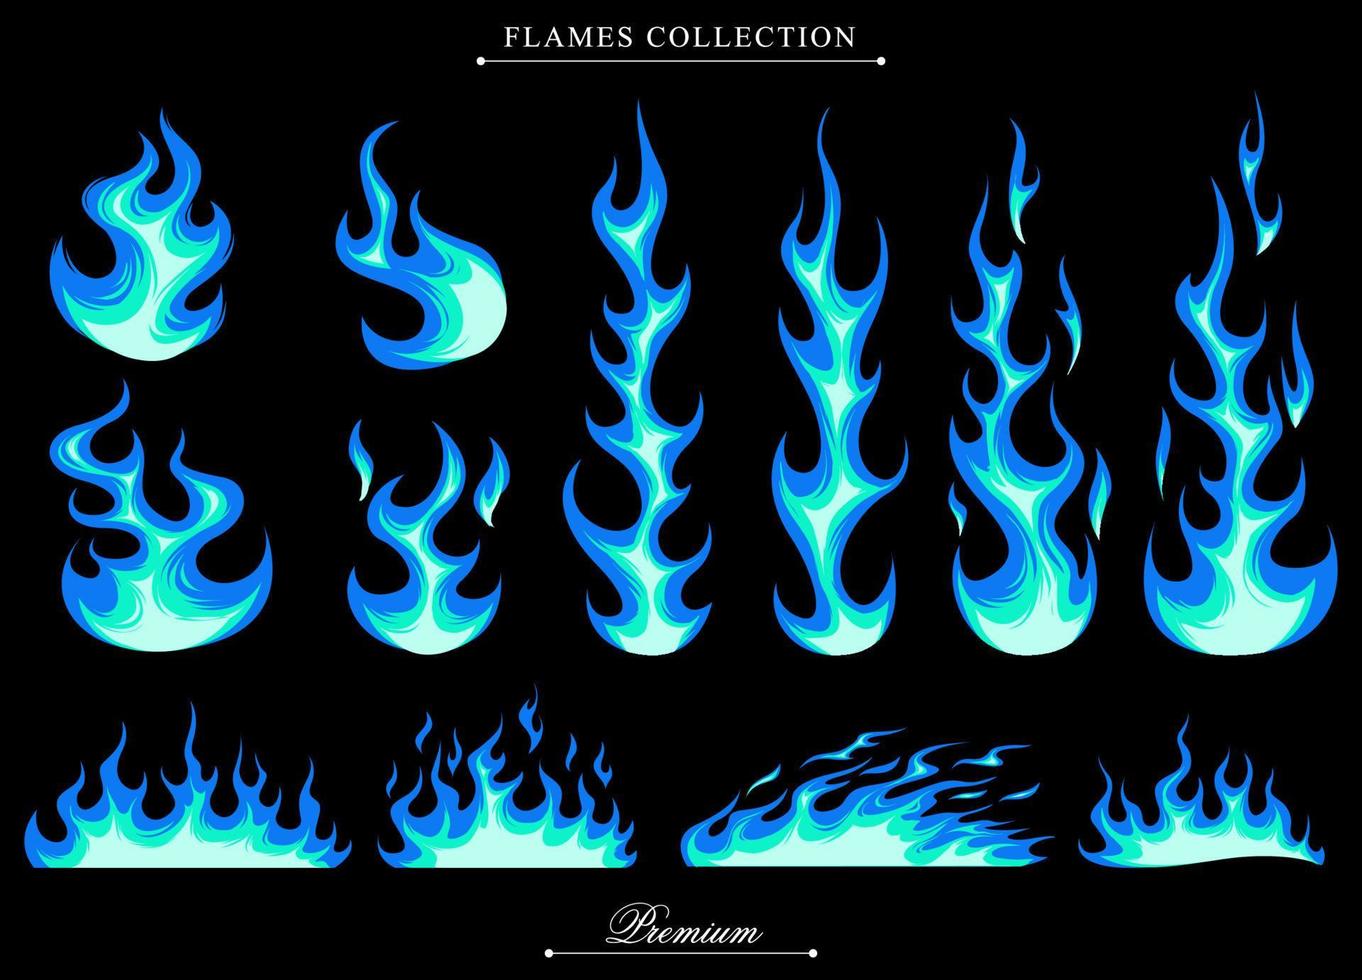 Blue flames set of fantasy element design illustration. Cartoon fire for comic, poster, tattoo, sticker, wrap, apparel, background, ornament. Vector eps 10. Isolated on black background.